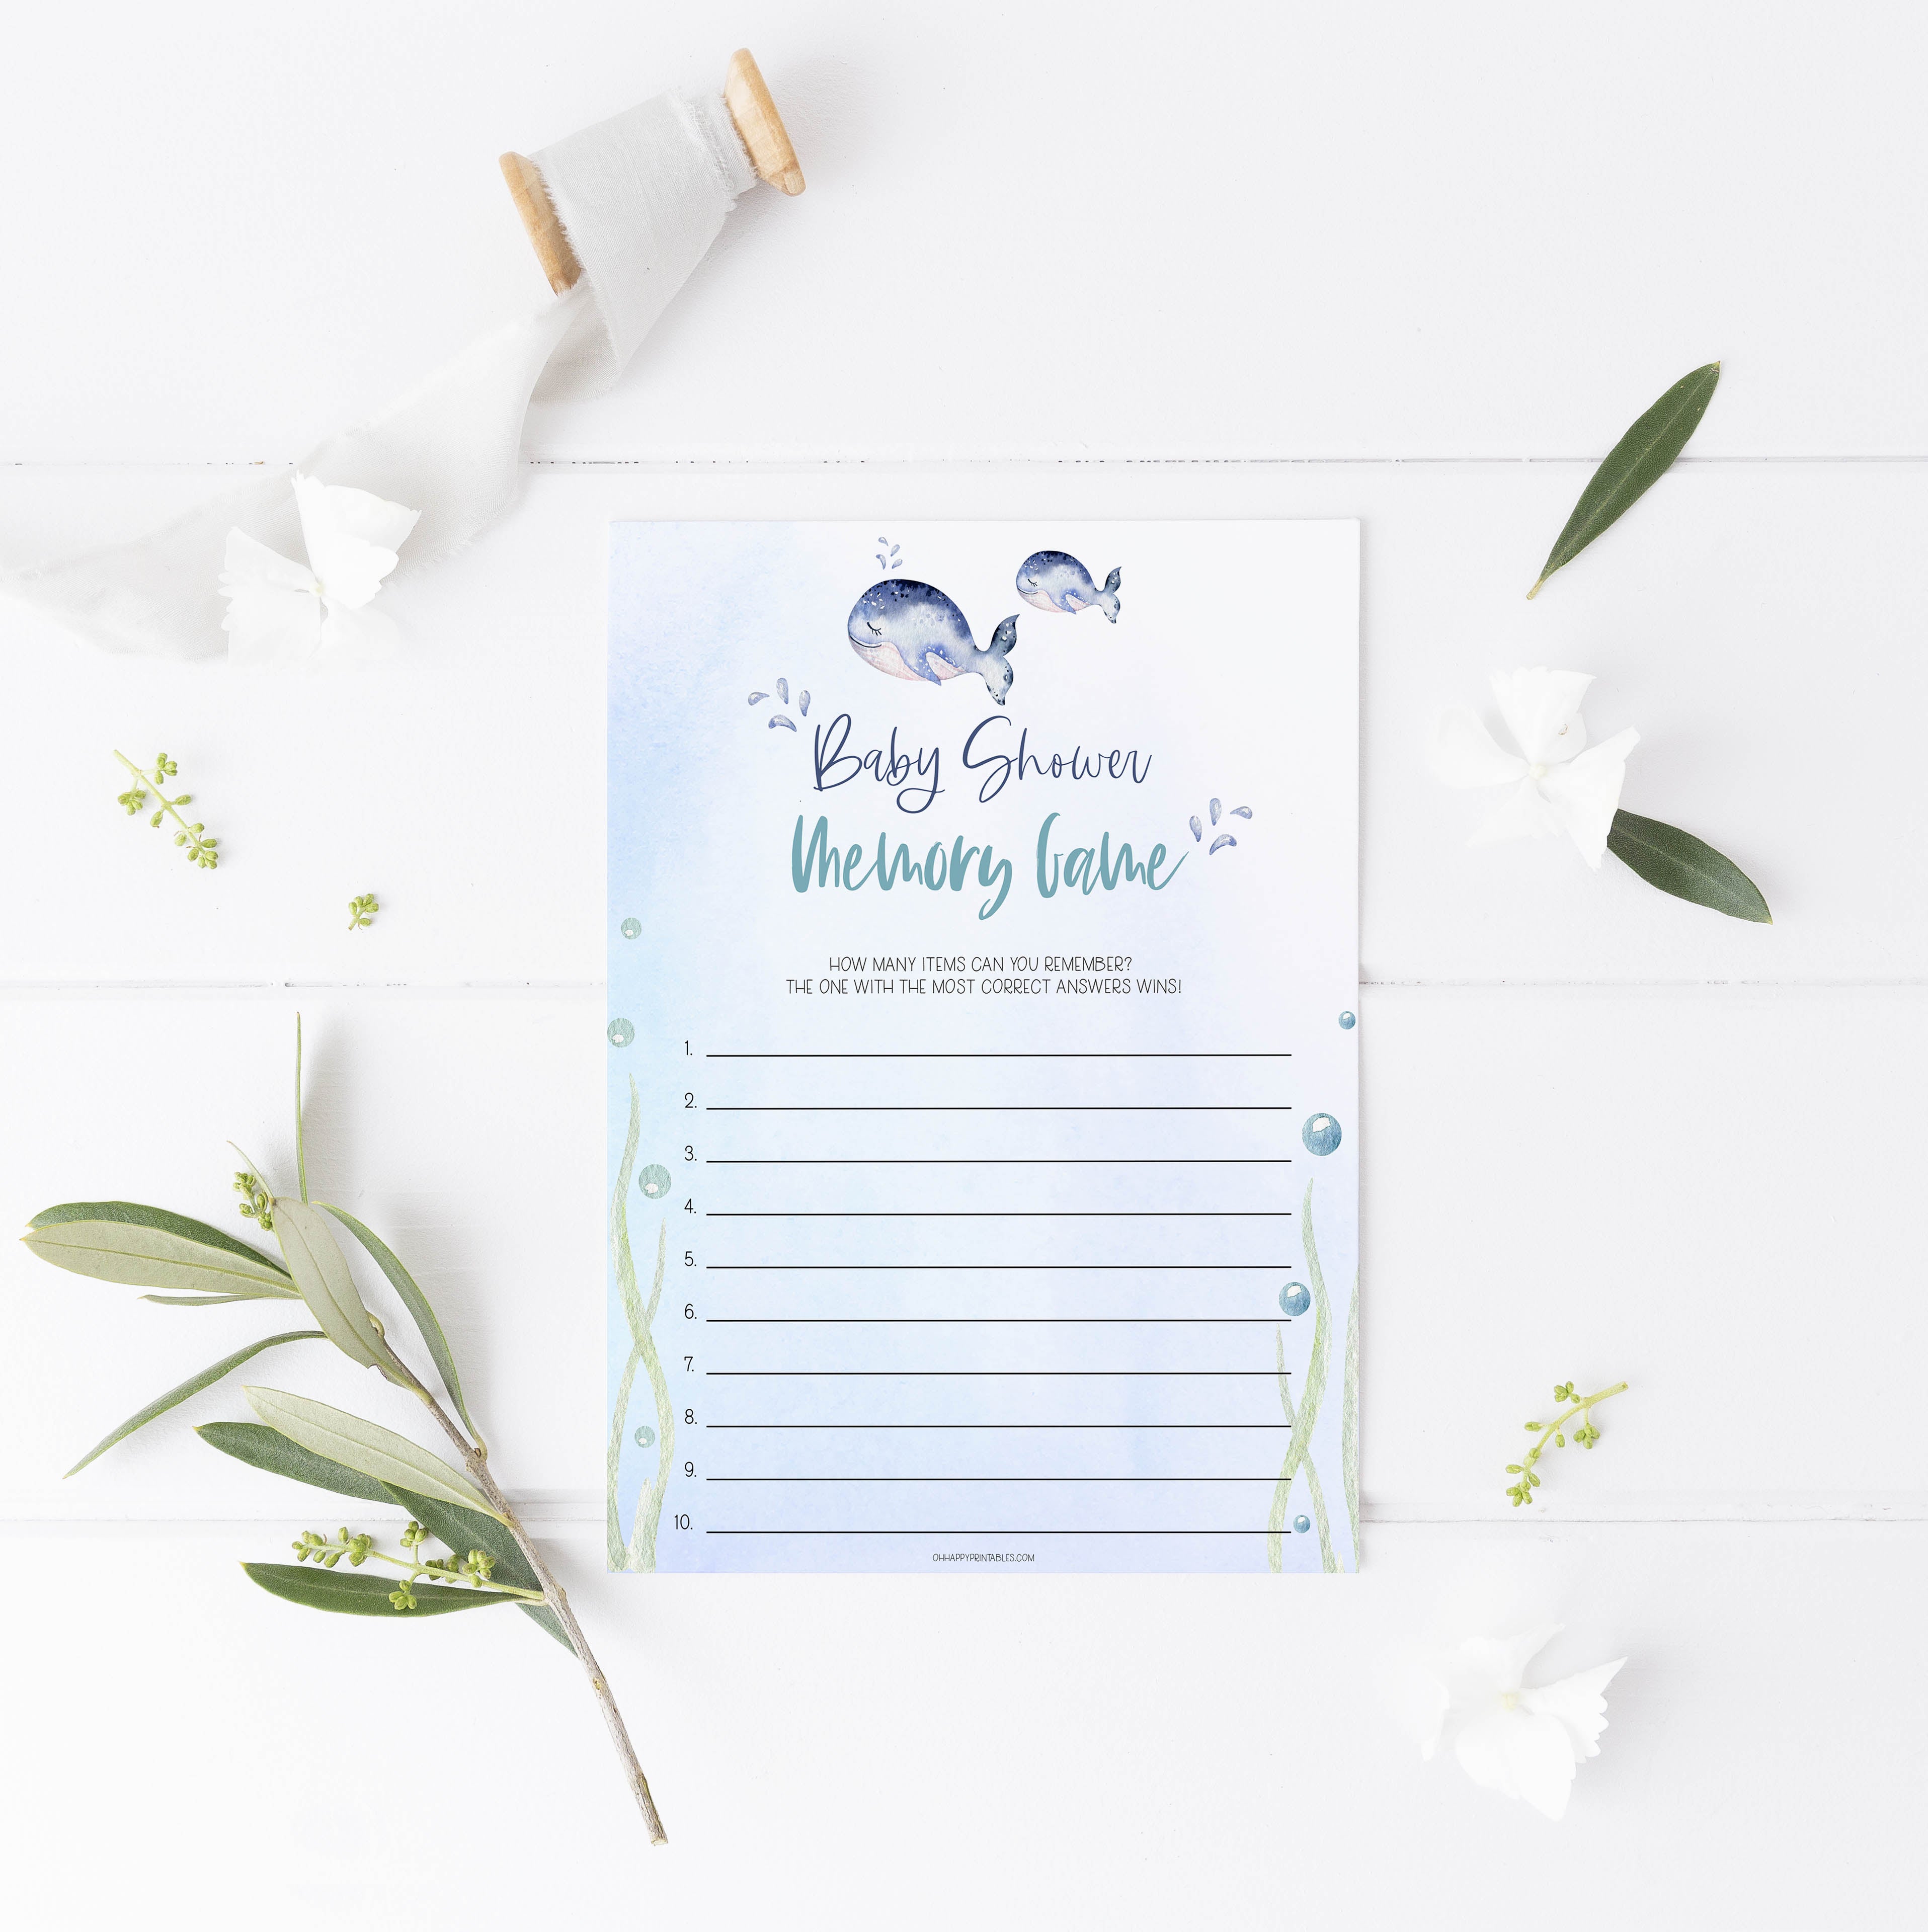 baby shower memory game, Printable baby shower games, whale baby games, baby shower games, fun baby shower ideas, top baby shower ideas, whale baby shower, baby shower games, fun whale baby shower ideas